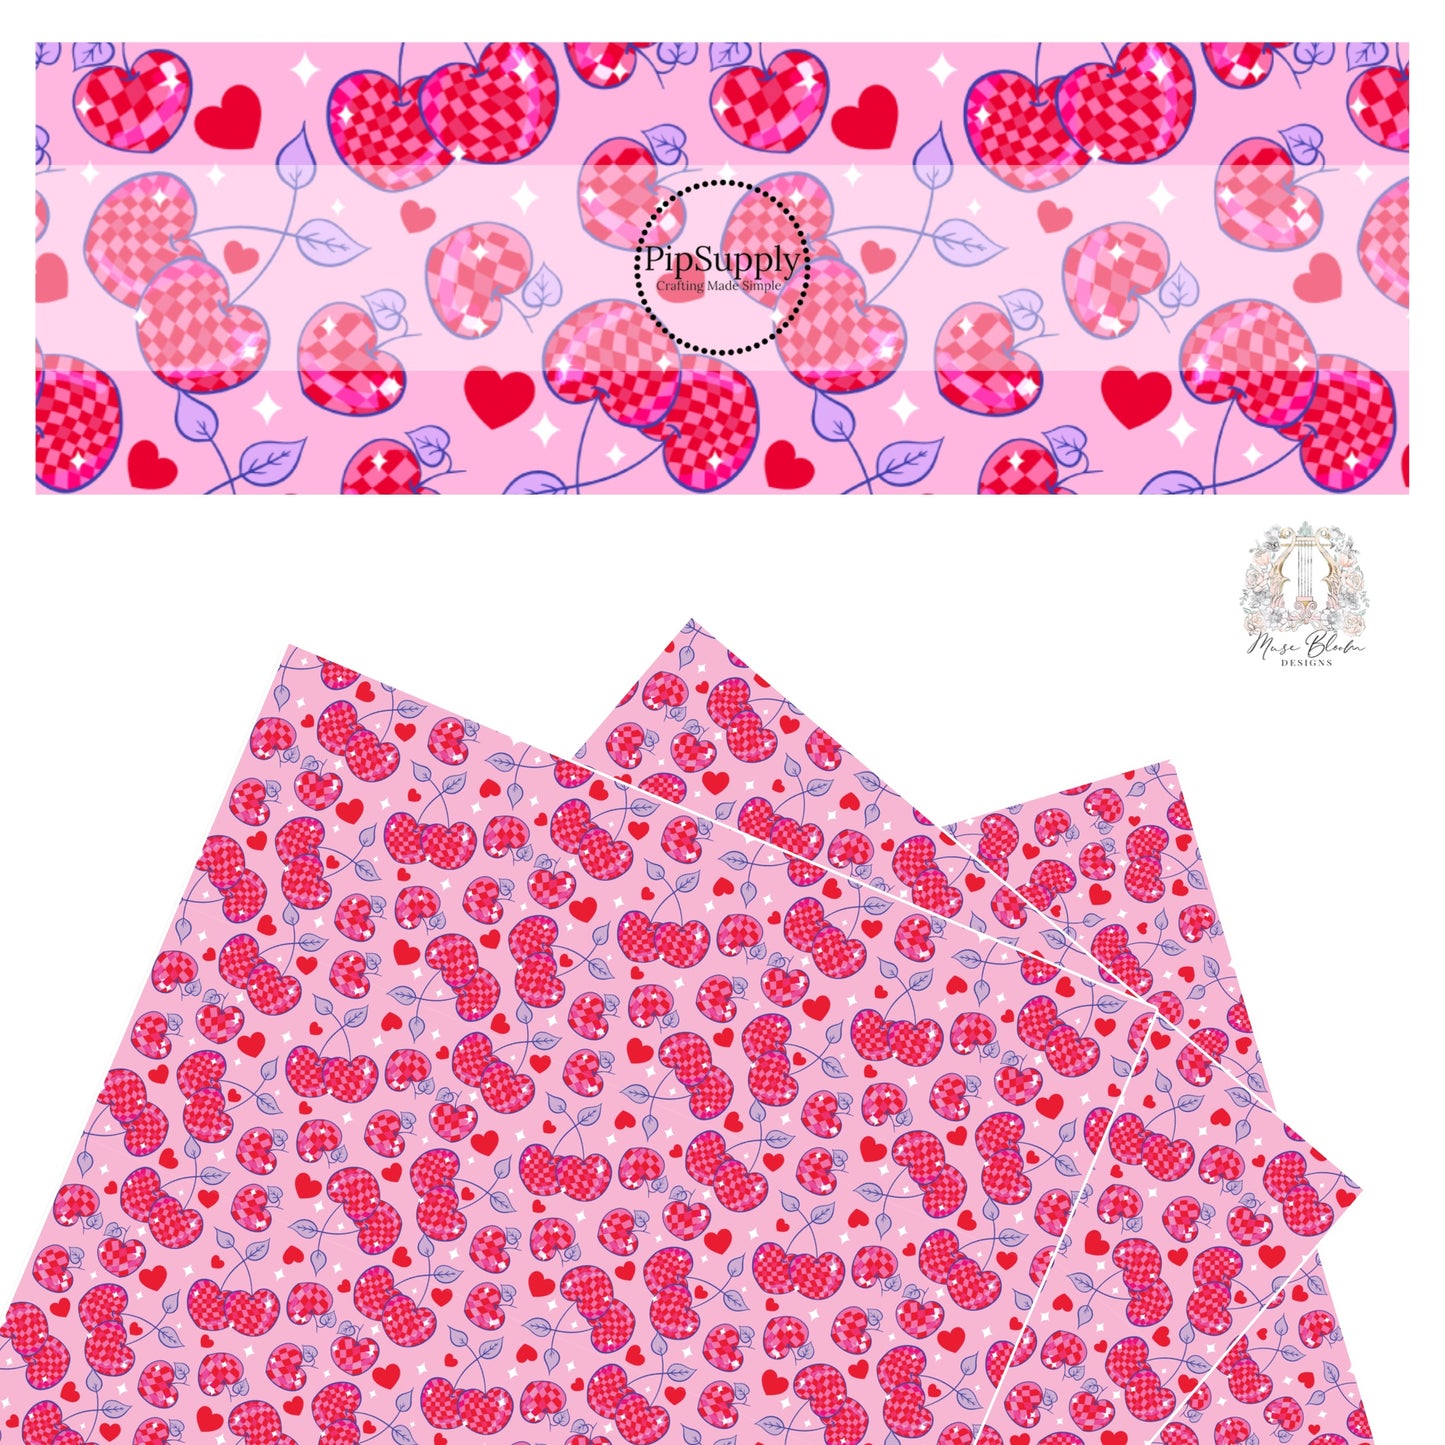 Purple outlined heart cherries with red and pink checker and white dazzles with purple stems and red hearts on pink faux leather sheets